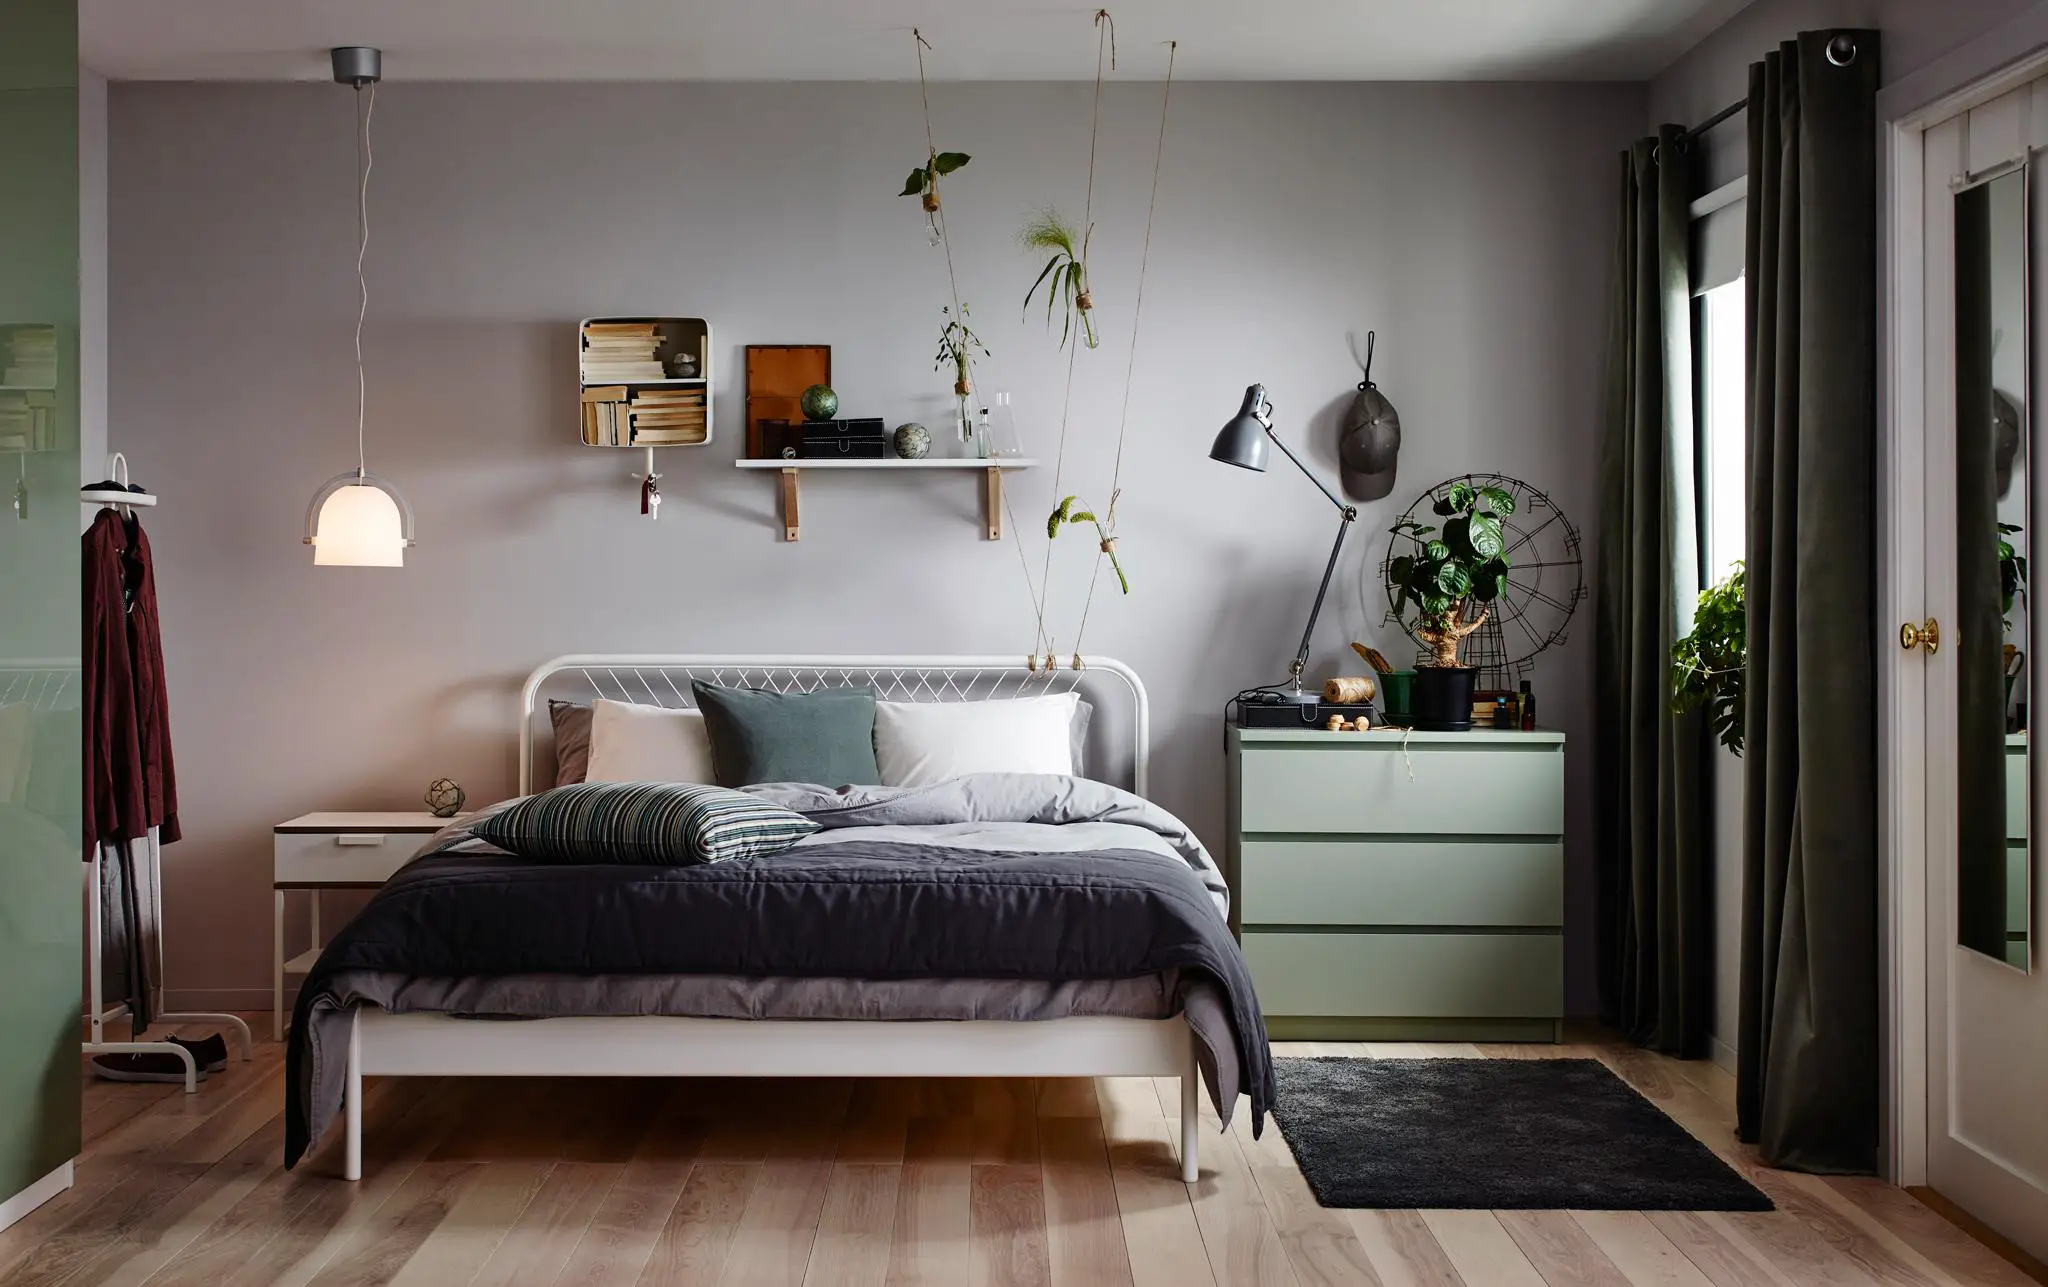 20 deas how to organize a small bedroom so to look bigger